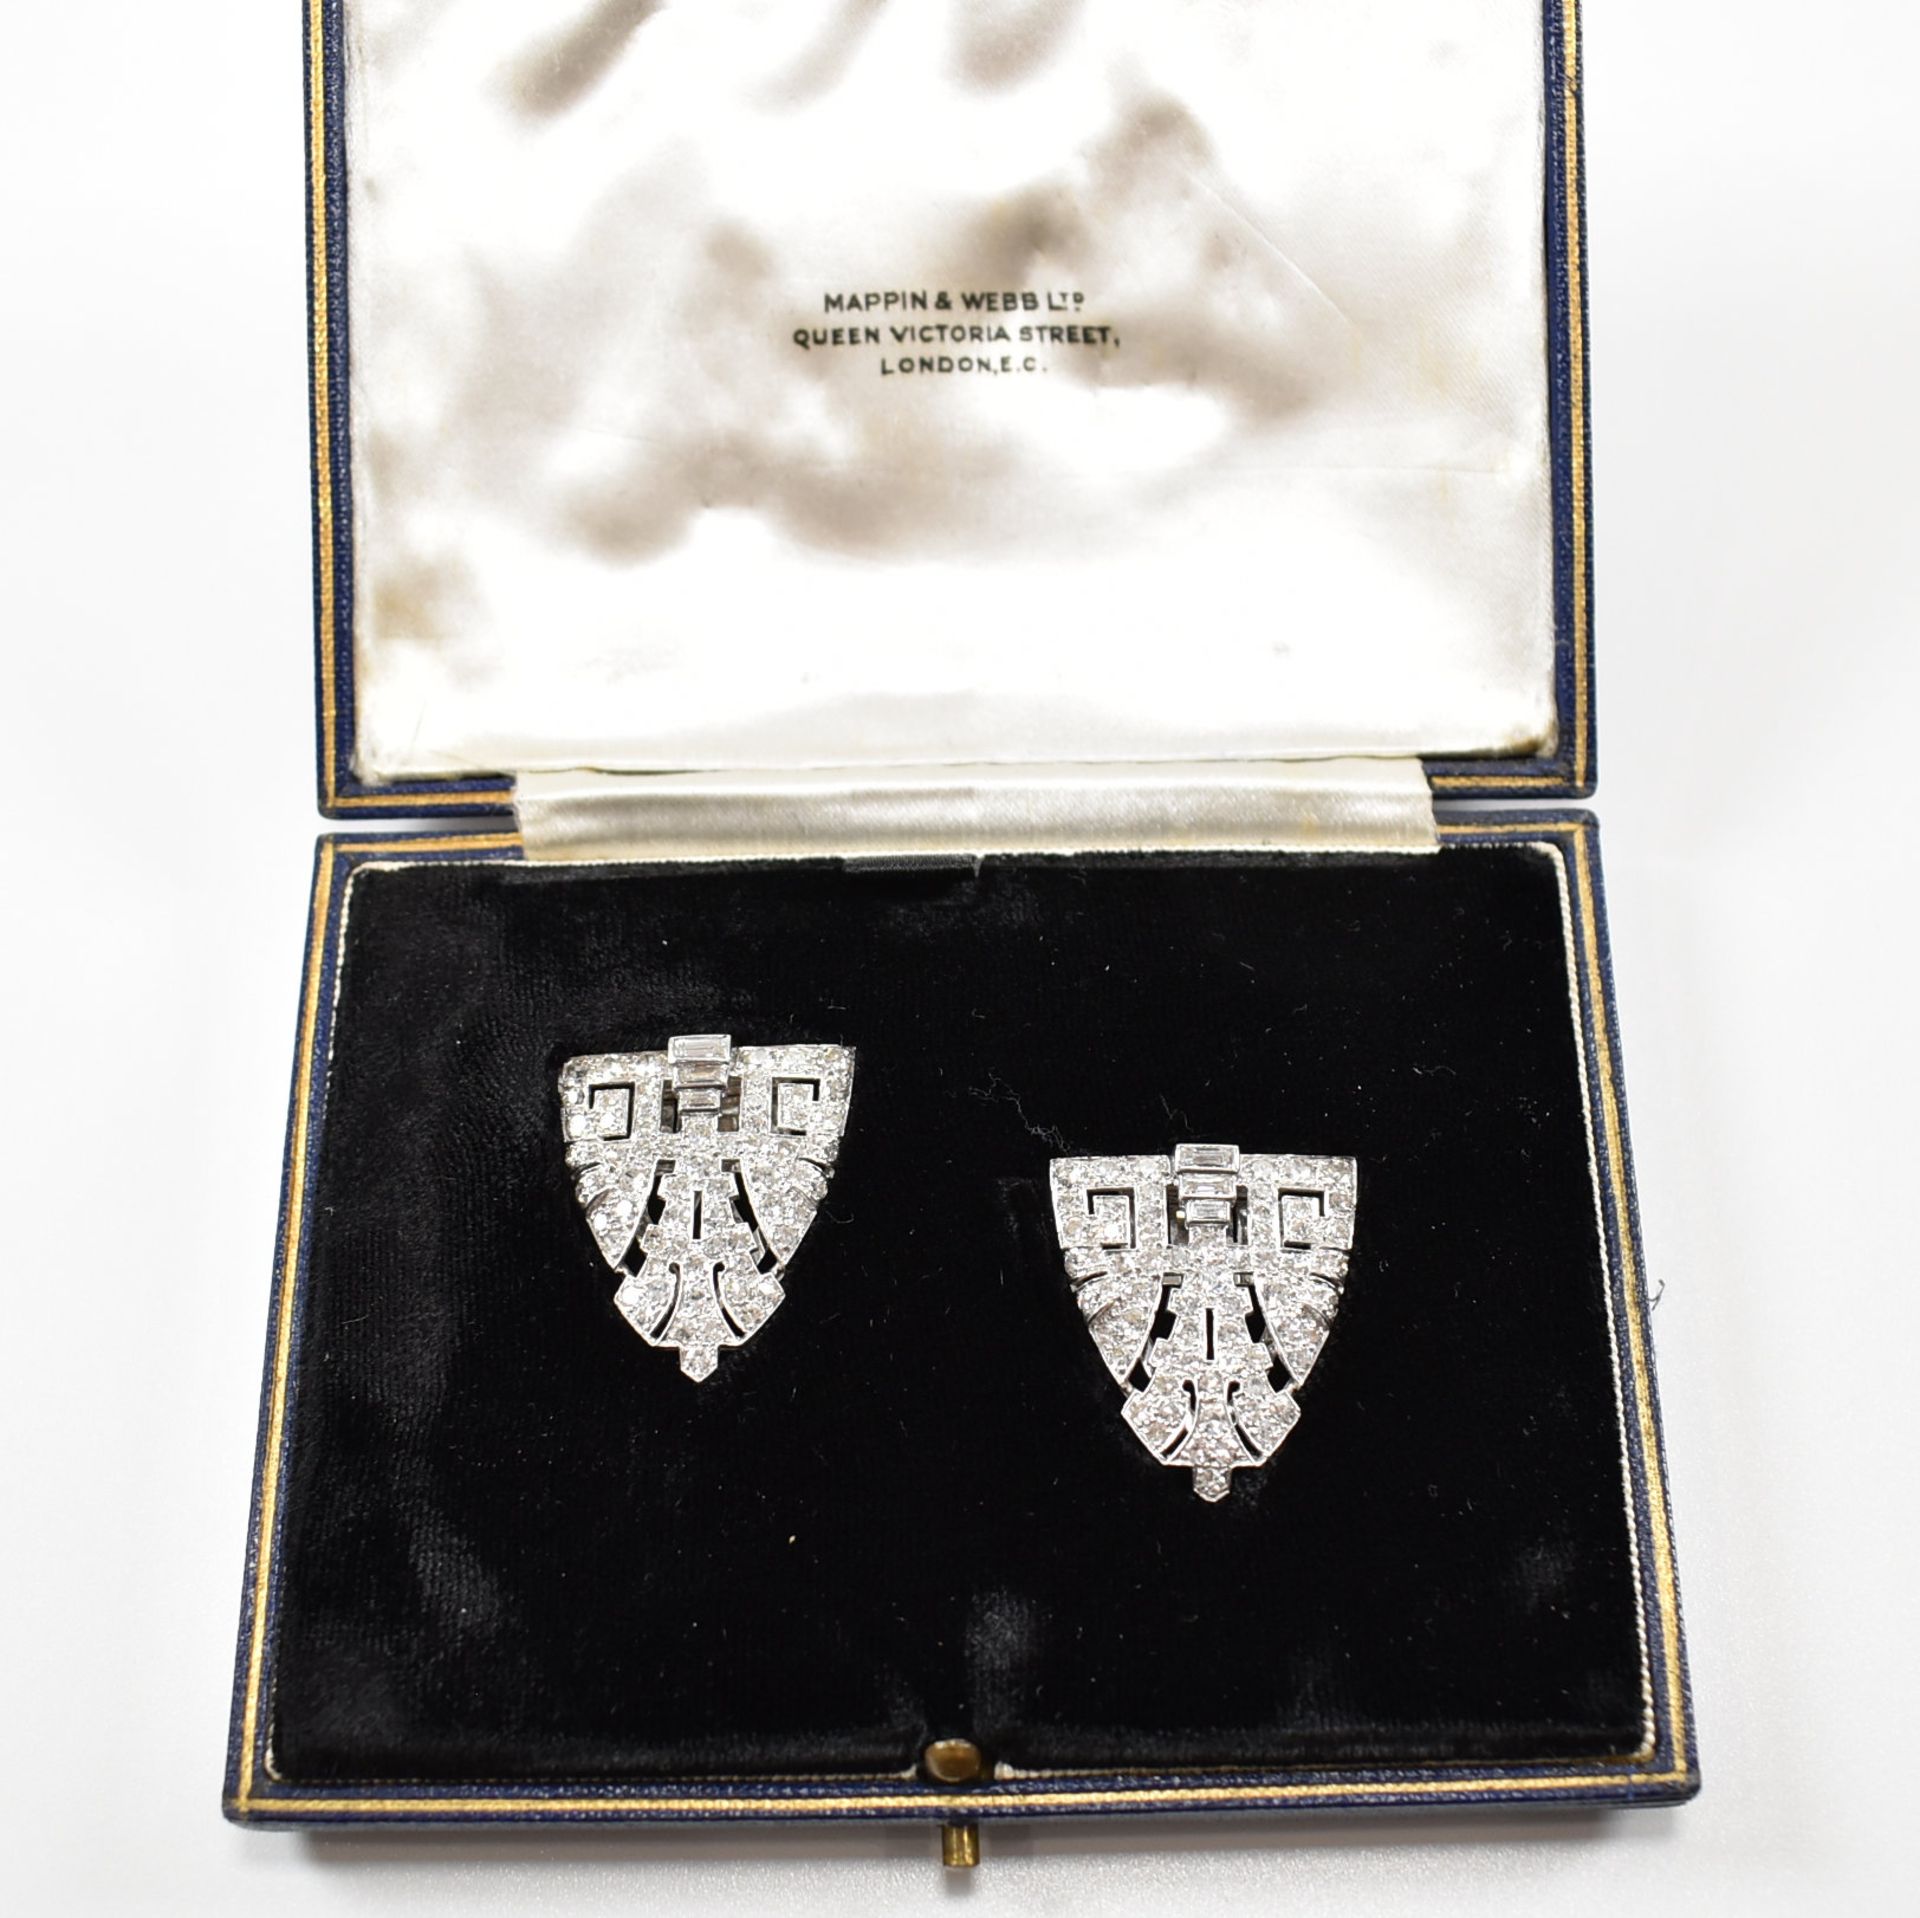 MAPPIN & WEBB - PAIR OF ART DECO DIAMOND DOUBLE DRESS CLIPS - Image 10 of 10